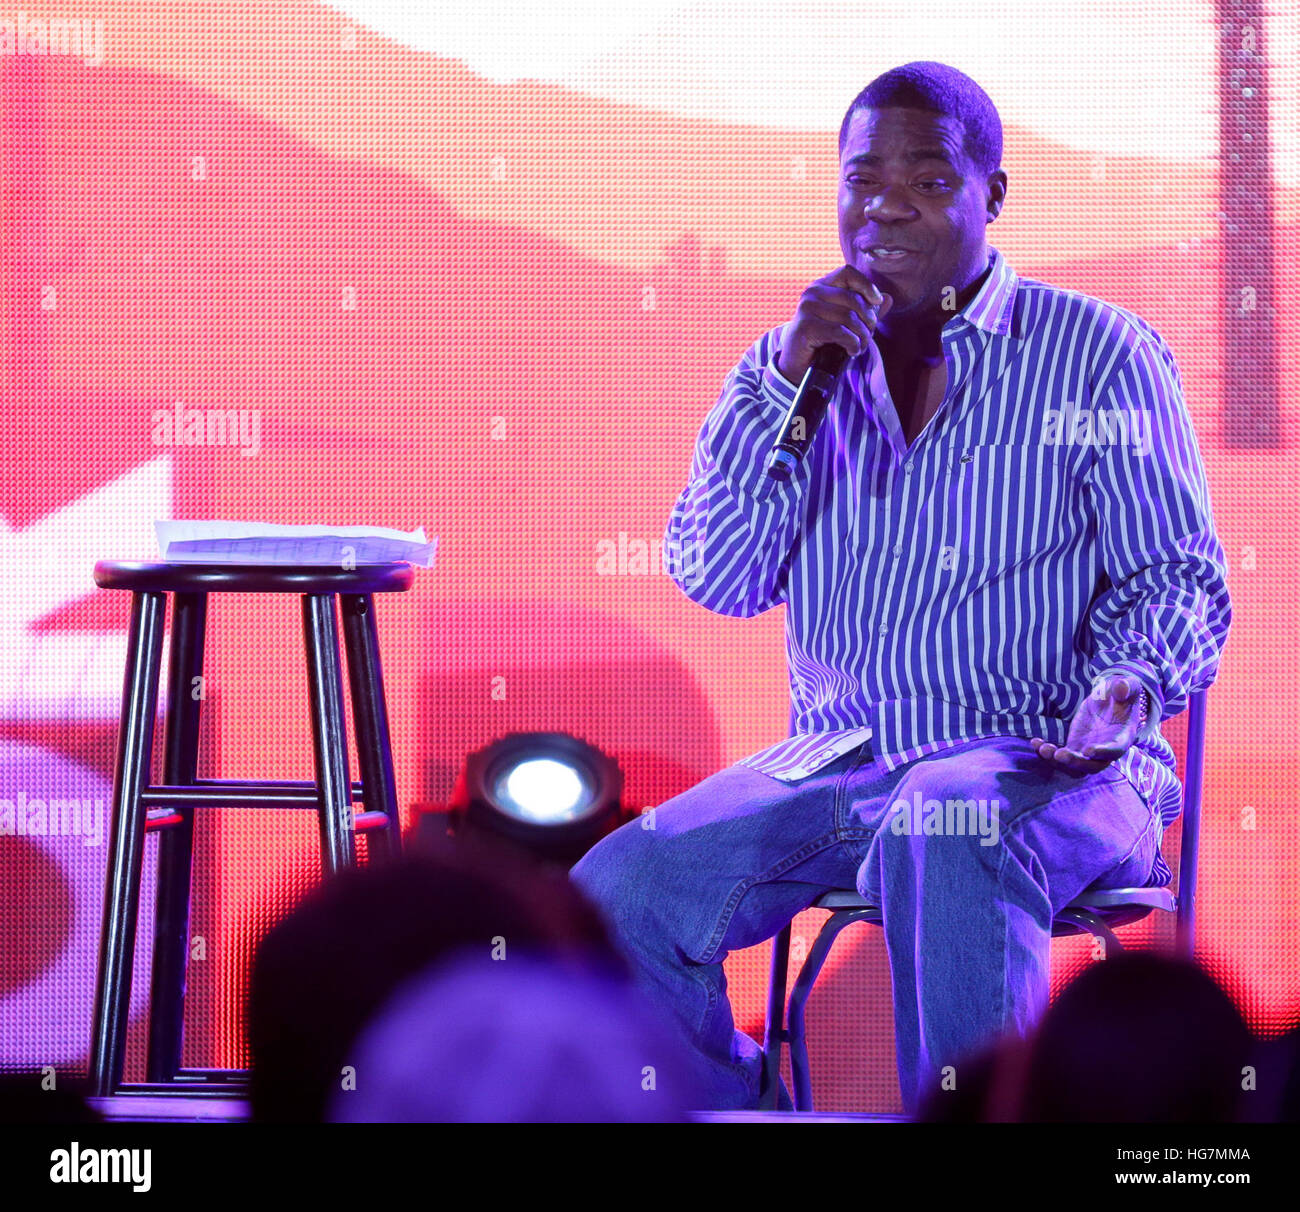 Tracy Morgan headlines the Funny Or Die Junction during SXSW 2016 on March 14, 2016 in Austin, Texas. Stock Photo